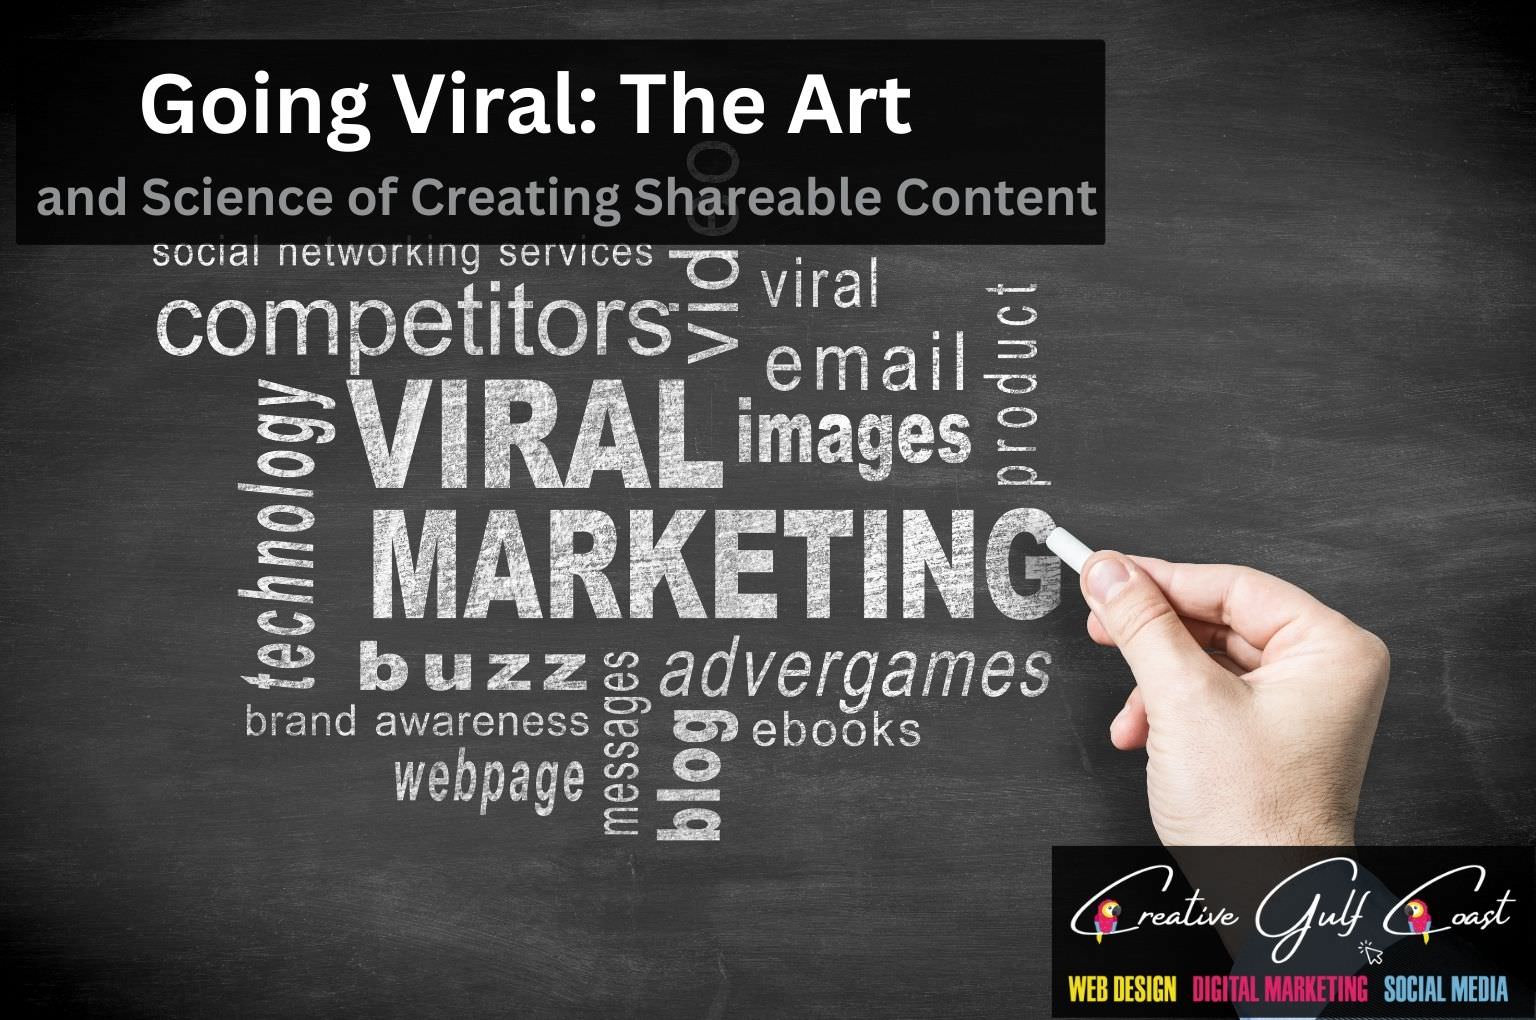 Viral Marketing and how to go viral with content and social media? Creative Gulf Coast Florida